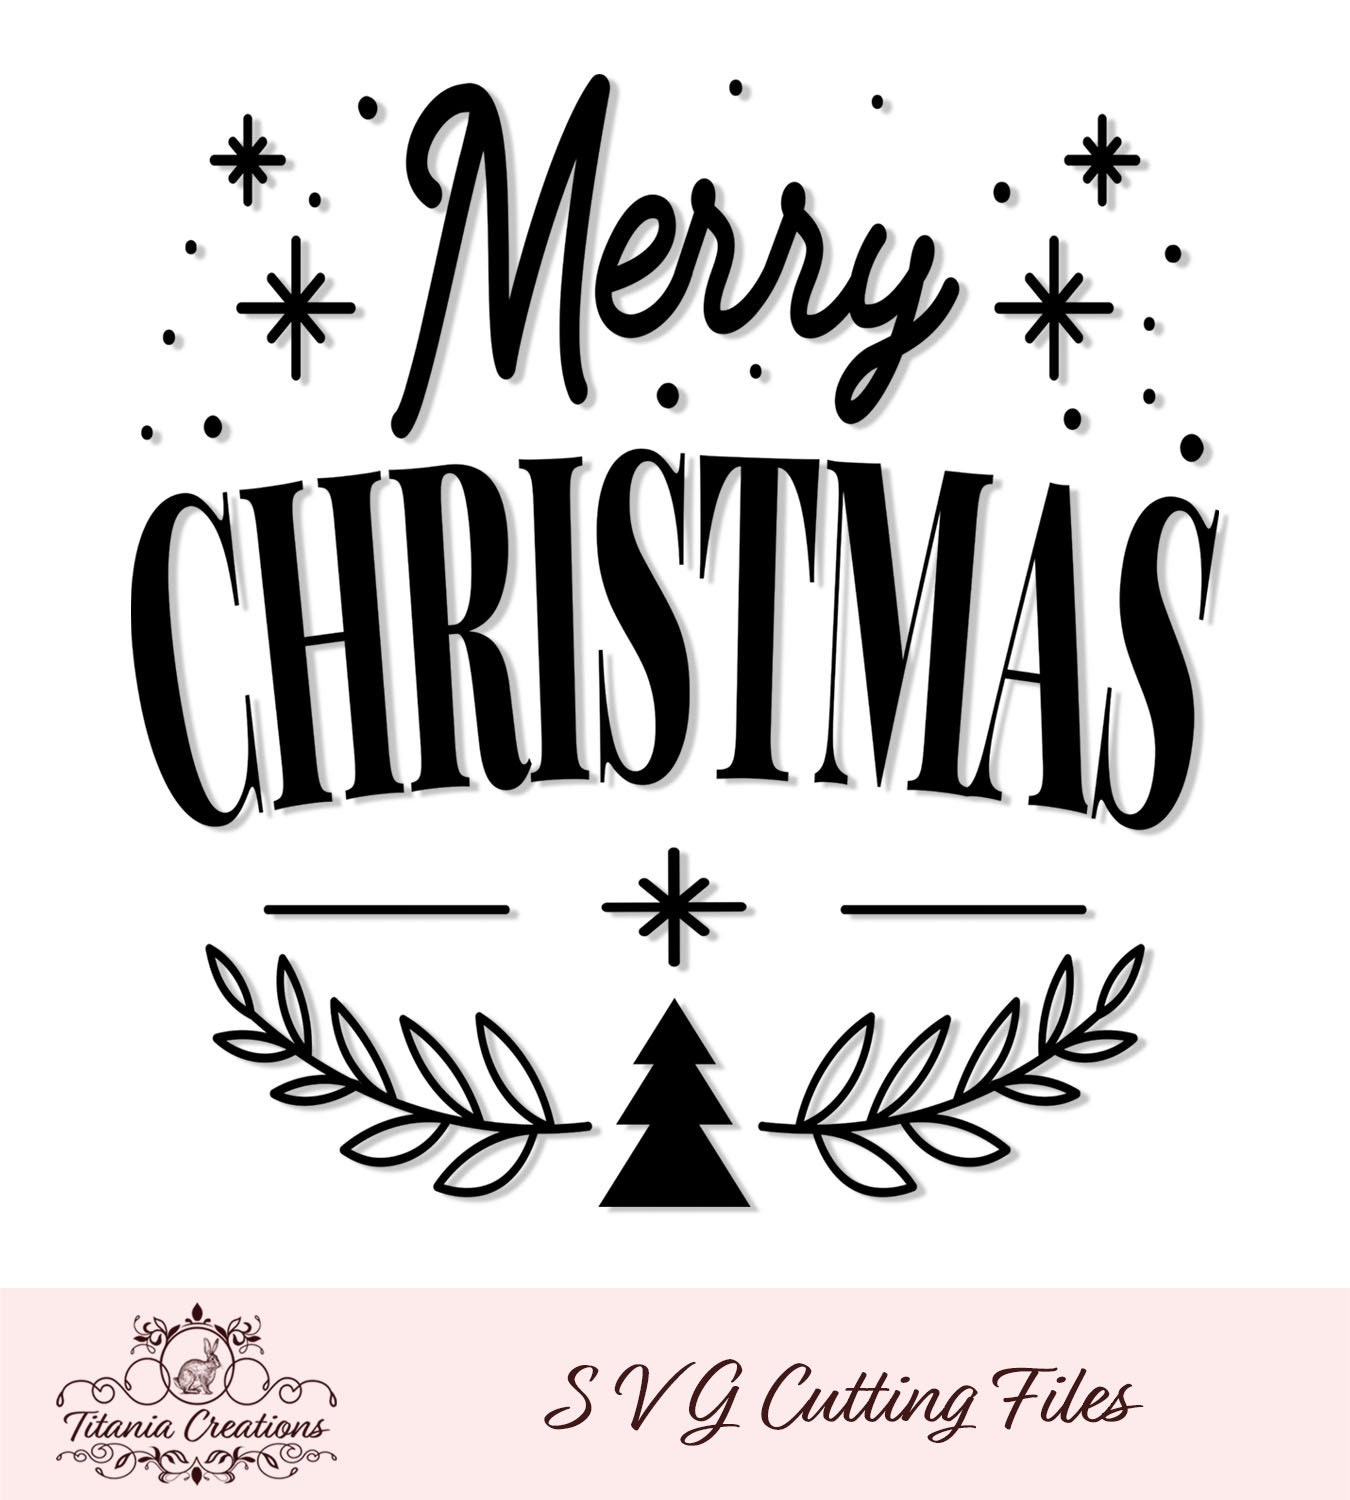 Download Merry Christmas 01 SVG Cut File by Titania Creations ...